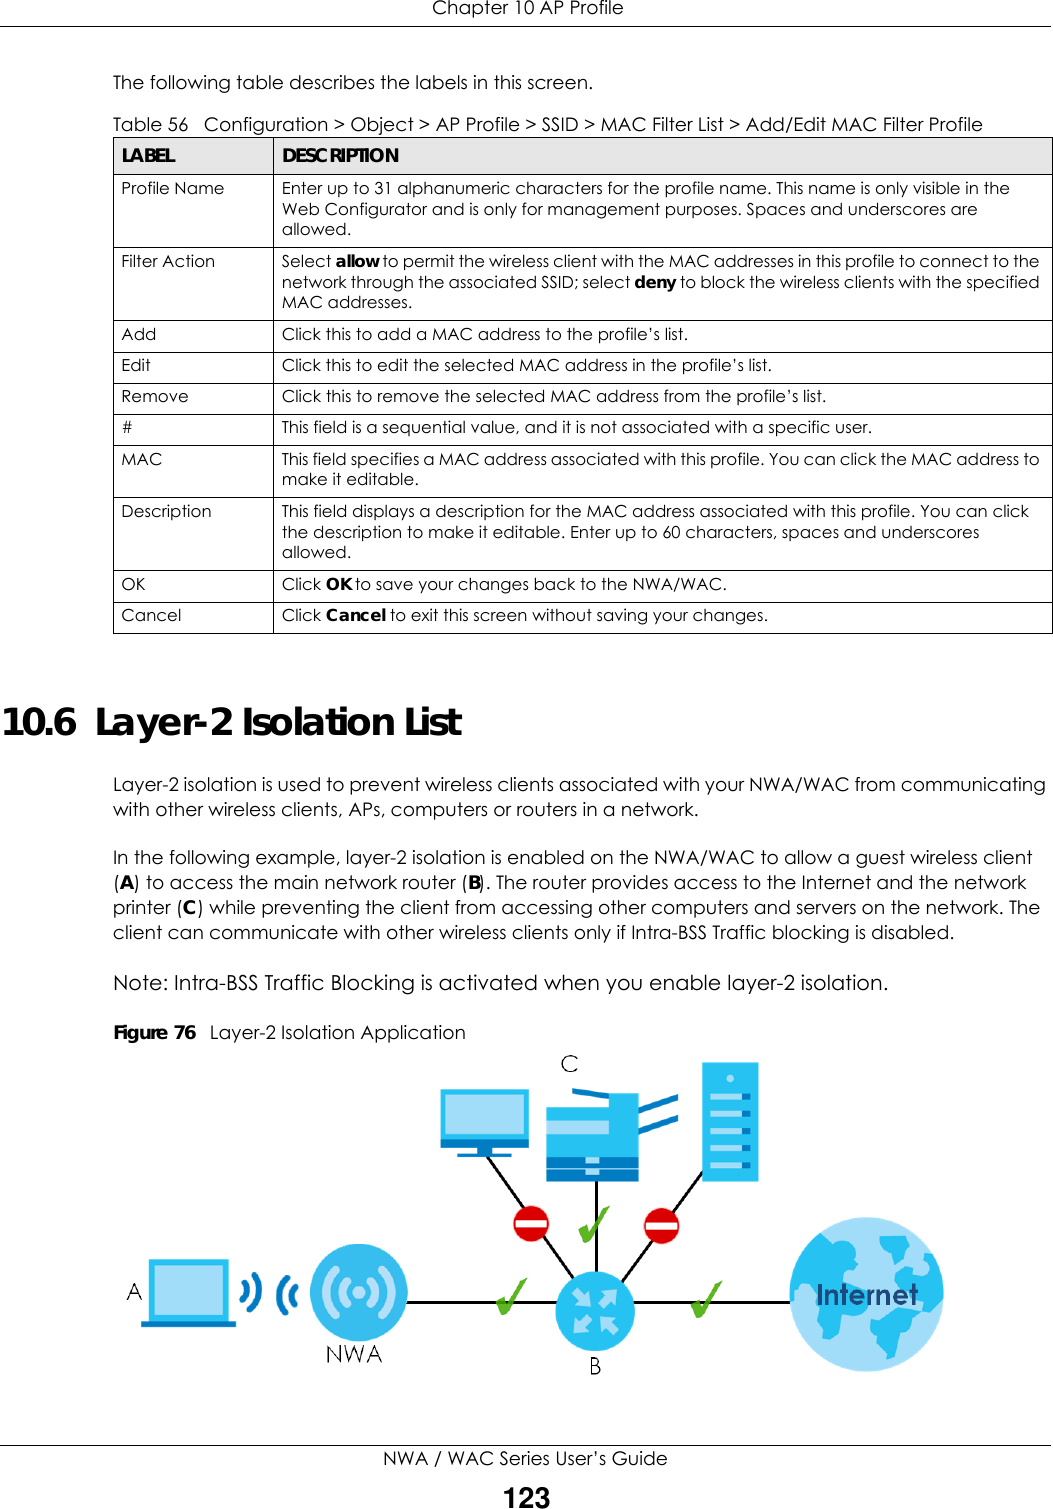  Chapter 10 AP ProfileNWA / WAC Series User’s Guide123The following table describes the labels in this screen.  10.6  Layer-2 Isolation ListLayer-2 isolation is used to prevent wireless clients associated with your NWA/WAC from communicating with other wireless clients, APs, computers or routers in a network.In the following example, layer-2 isolation is enabled on the NWA/WAC to allow a guest wireless client (A) to access the main network router (B). The router provides access to the Internet and the network printer (C) while preventing the client from accessing other computers and servers on the network. The client can communicate with other wireless clients only if Intra-BSS Traffic blocking is disabled.Note: Intra-BSS Traffic Blocking is activated when you enable layer-2 isolation.Figure 76   Layer-2 Isolation ApplicationTable 56   Configuration &gt; Object &gt; AP Profile &gt; SSID &gt; MAC Filter List &gt; Add/Edit MAC Filter ProfileLABEL DESCRIPTIONProfile Name Enter up to 31 alphanumeric characters for the profile name. This name is only visible in the Web Configurator and is only for management purposes. Spaces and underscores are allowed.Filter Action Select allow to permit the wireless client with the MAC addresses in this profile to connect to the network through the associated SSID; select deny to block the wireless clients with the specified MAC addresses.Add Click this to add a MAC address to the profile’s list.Edit Click this to edit the selected MAC address in the profile’s list.Remove Click this to remove the selected MAC address from the profile’s list.# This field is a sequential value, and it is not associated with a specific user.MAC This field specifies a MAC address associated with this profile. You can click the MAC address to make it editable.Description This field displays a description for the MAC address associated with this profile. You can click the description to make it editable. Enter up to 60 characters, spaces and underscores allowed.OK Click OK to save your changes back to the NWA/WAC.Cancel Click Cancel to exit this screen without saving your changes.